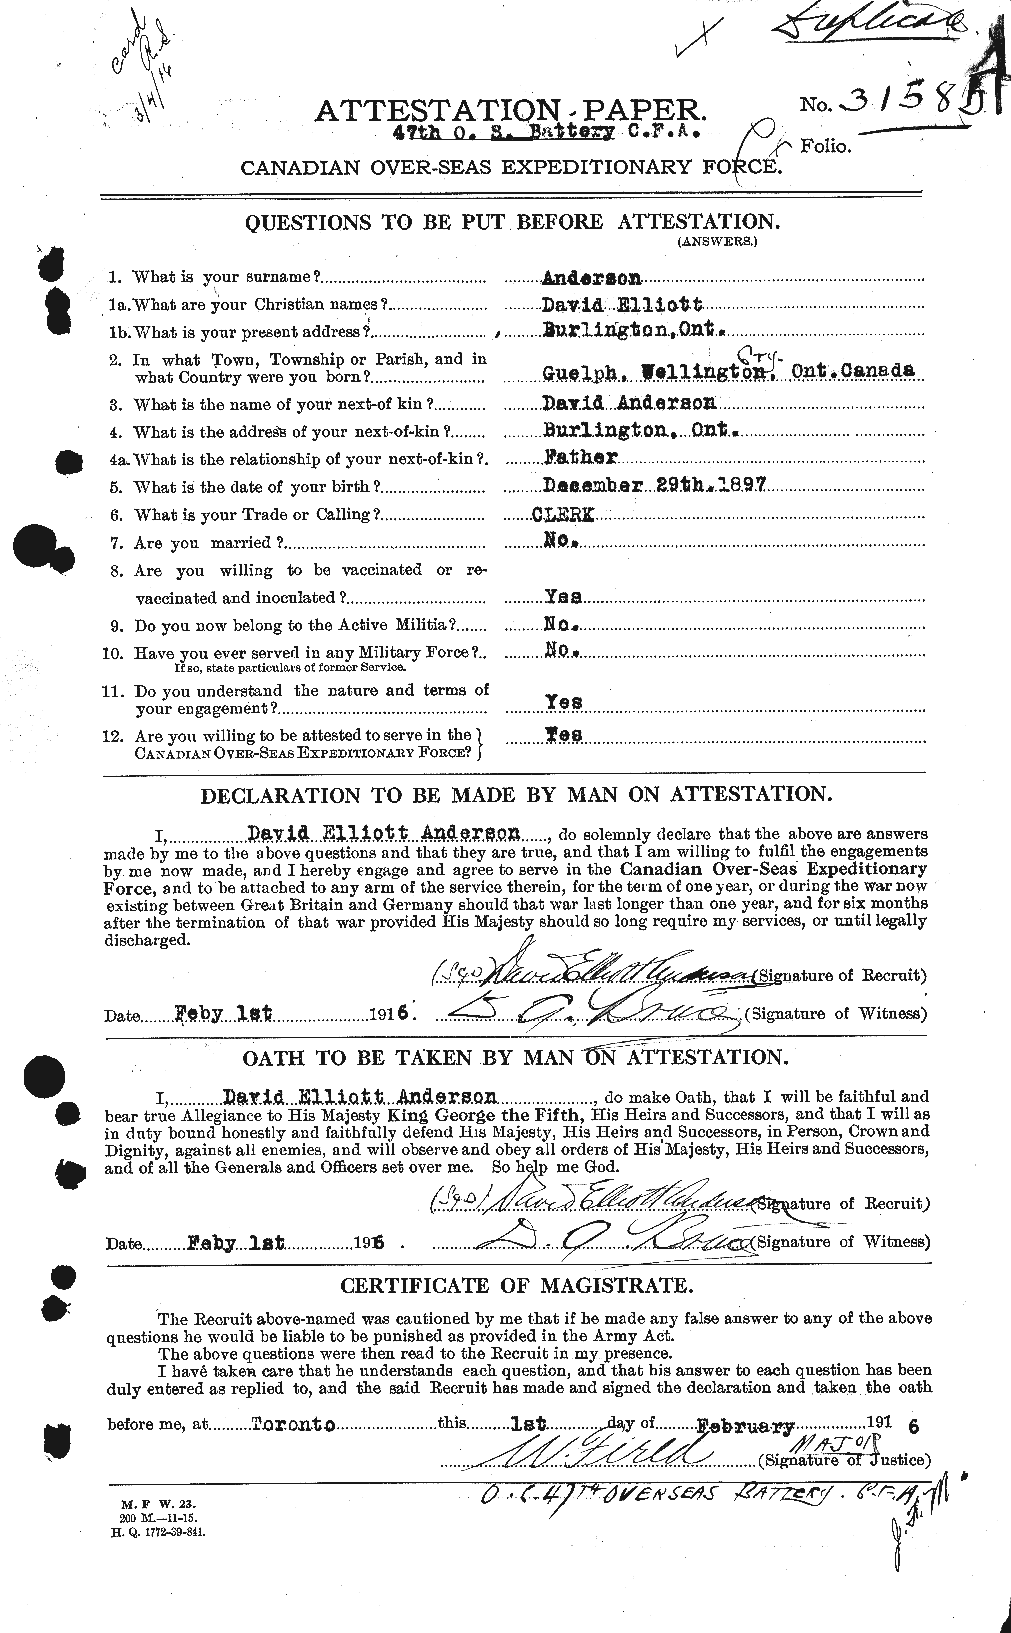 Personnel Records of the First World War - CEF 210013a